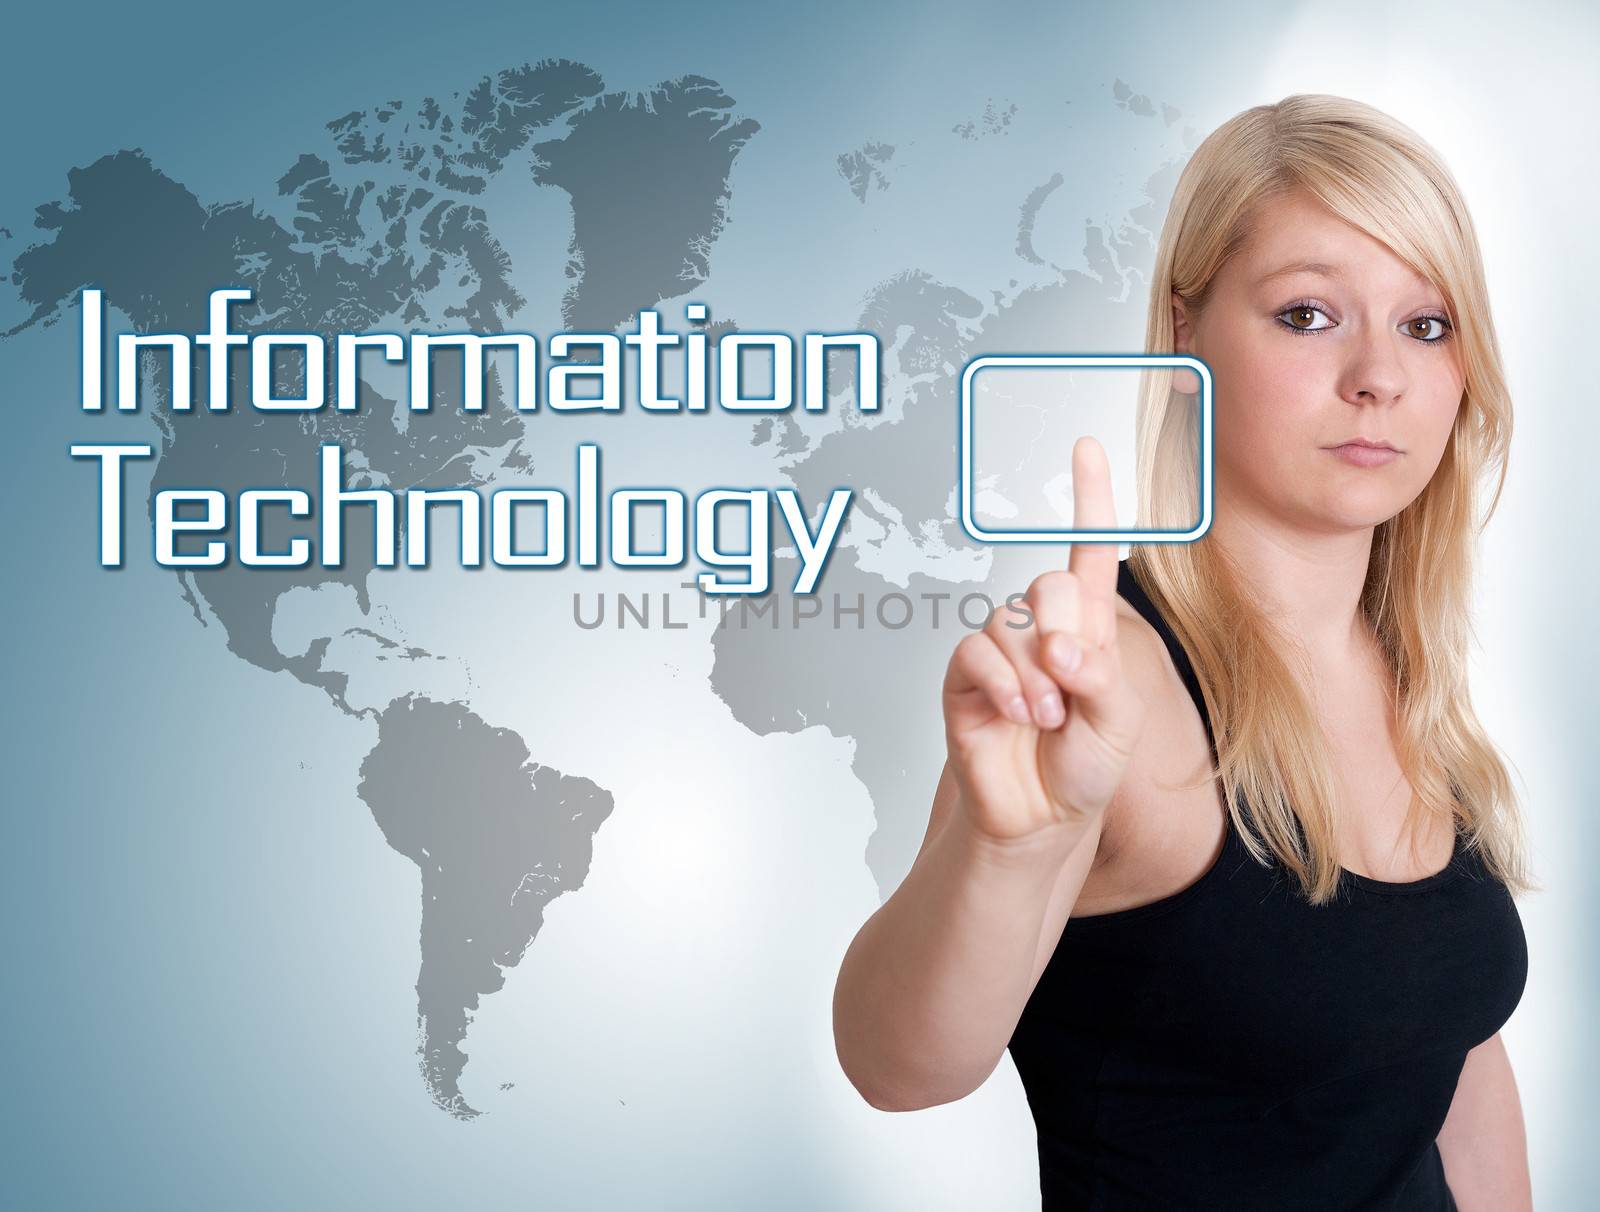 Young woman press digital Information Technology button on interface in front of her